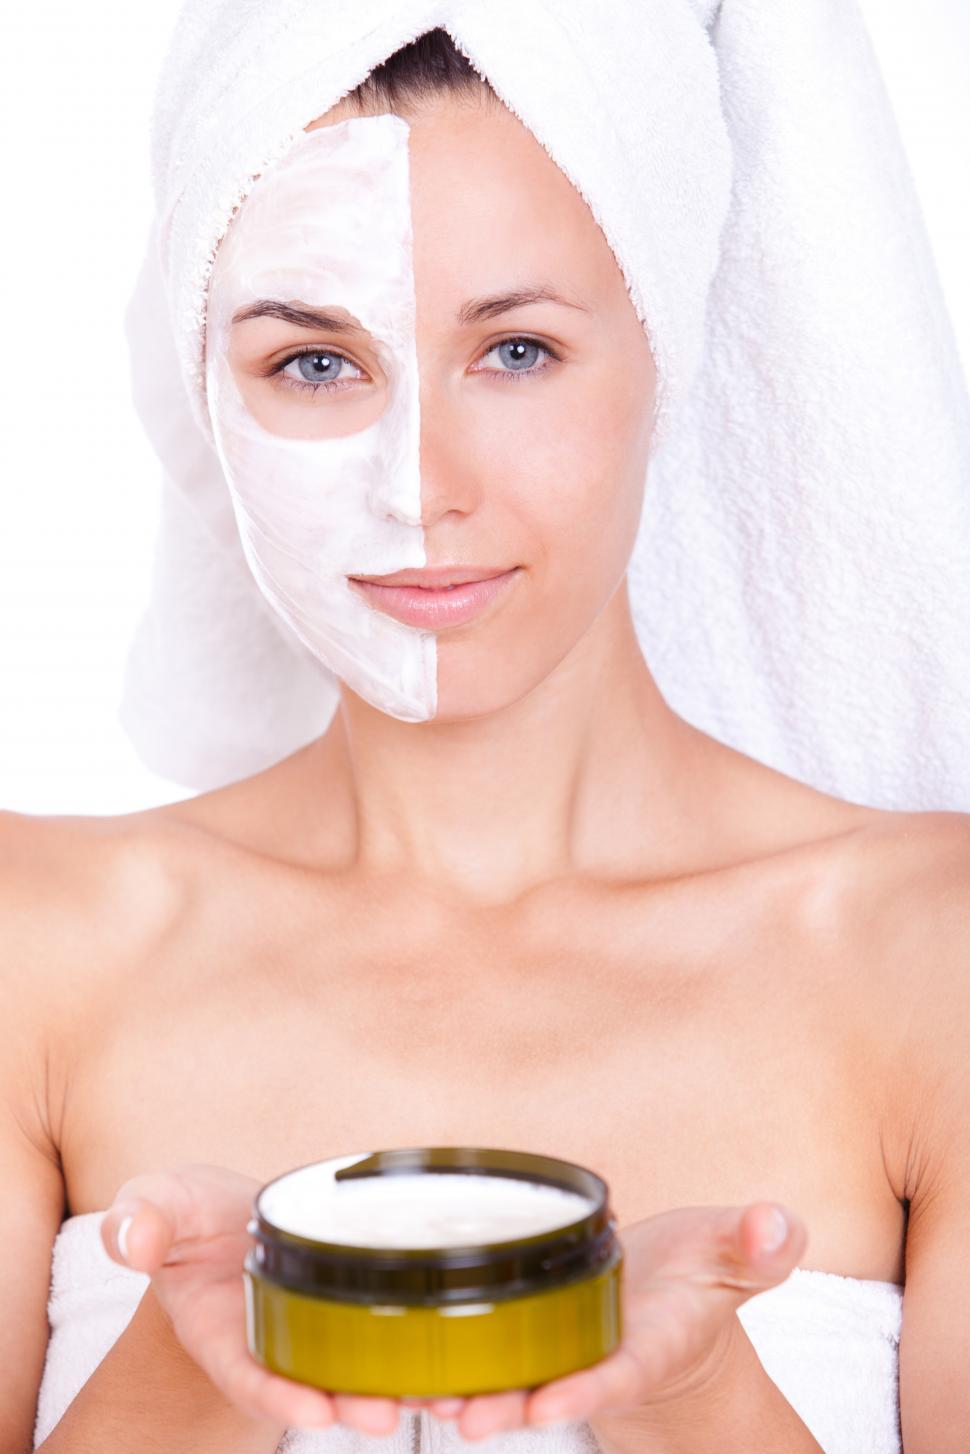 Free Image of Beautiful woman in towel with facial mask 